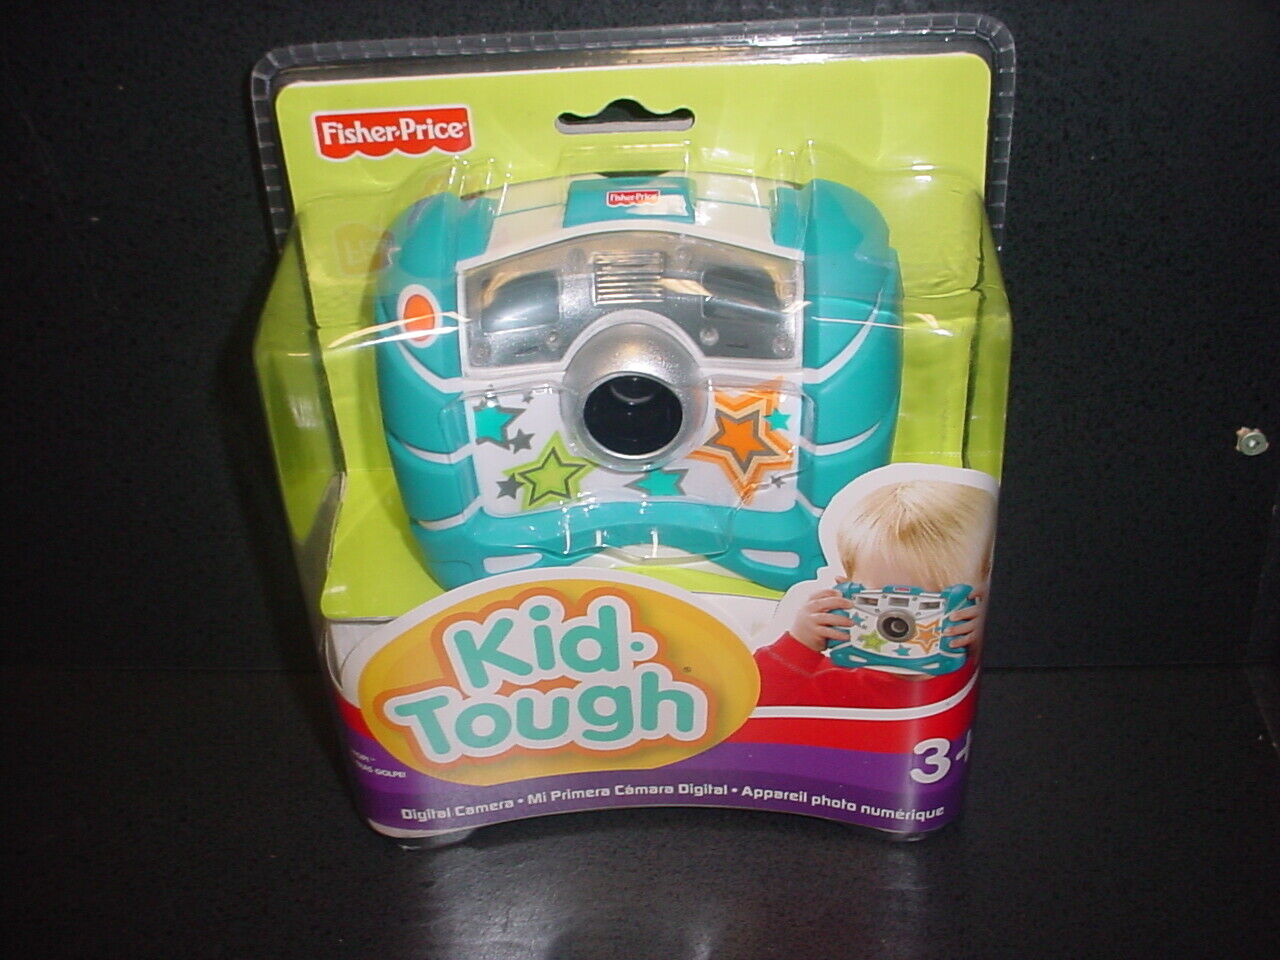 New In Package Fs Fisher-price Kid Tough Digital Camera 2009 Blue & White